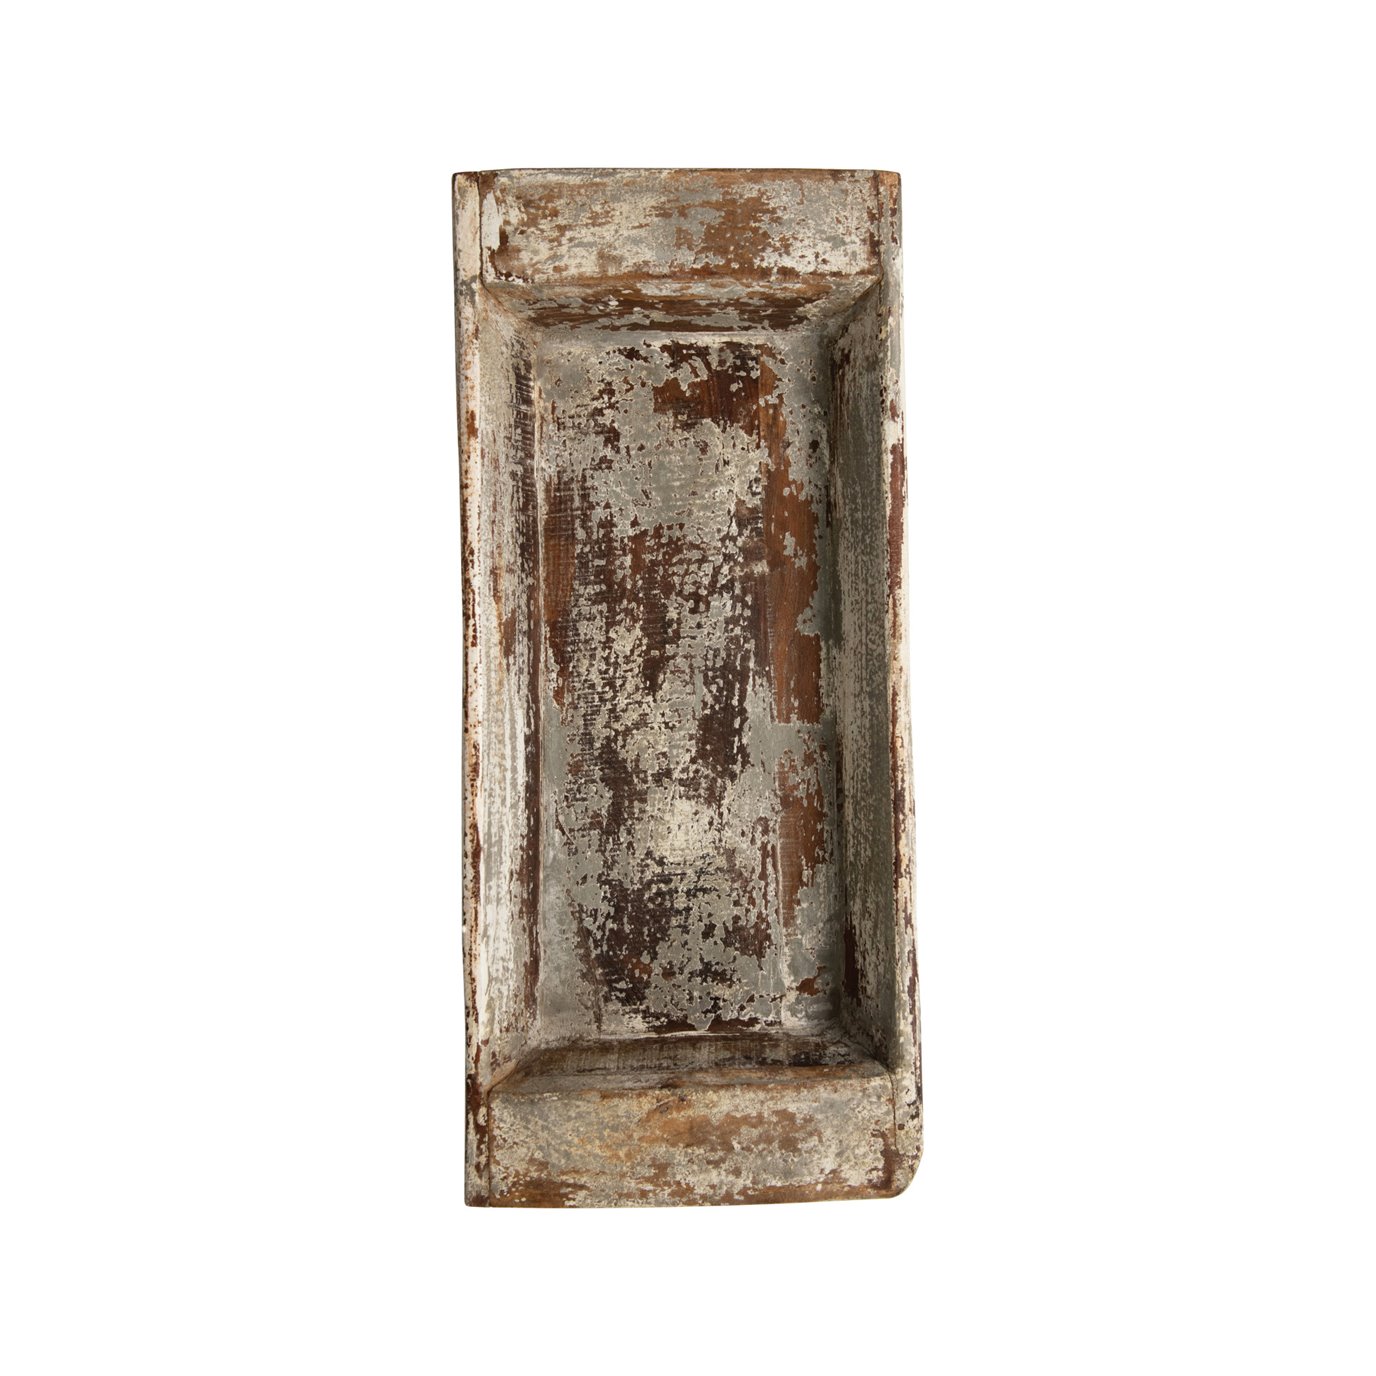 Decorative Reclaimed Distressed Whitewashed Wood Tray